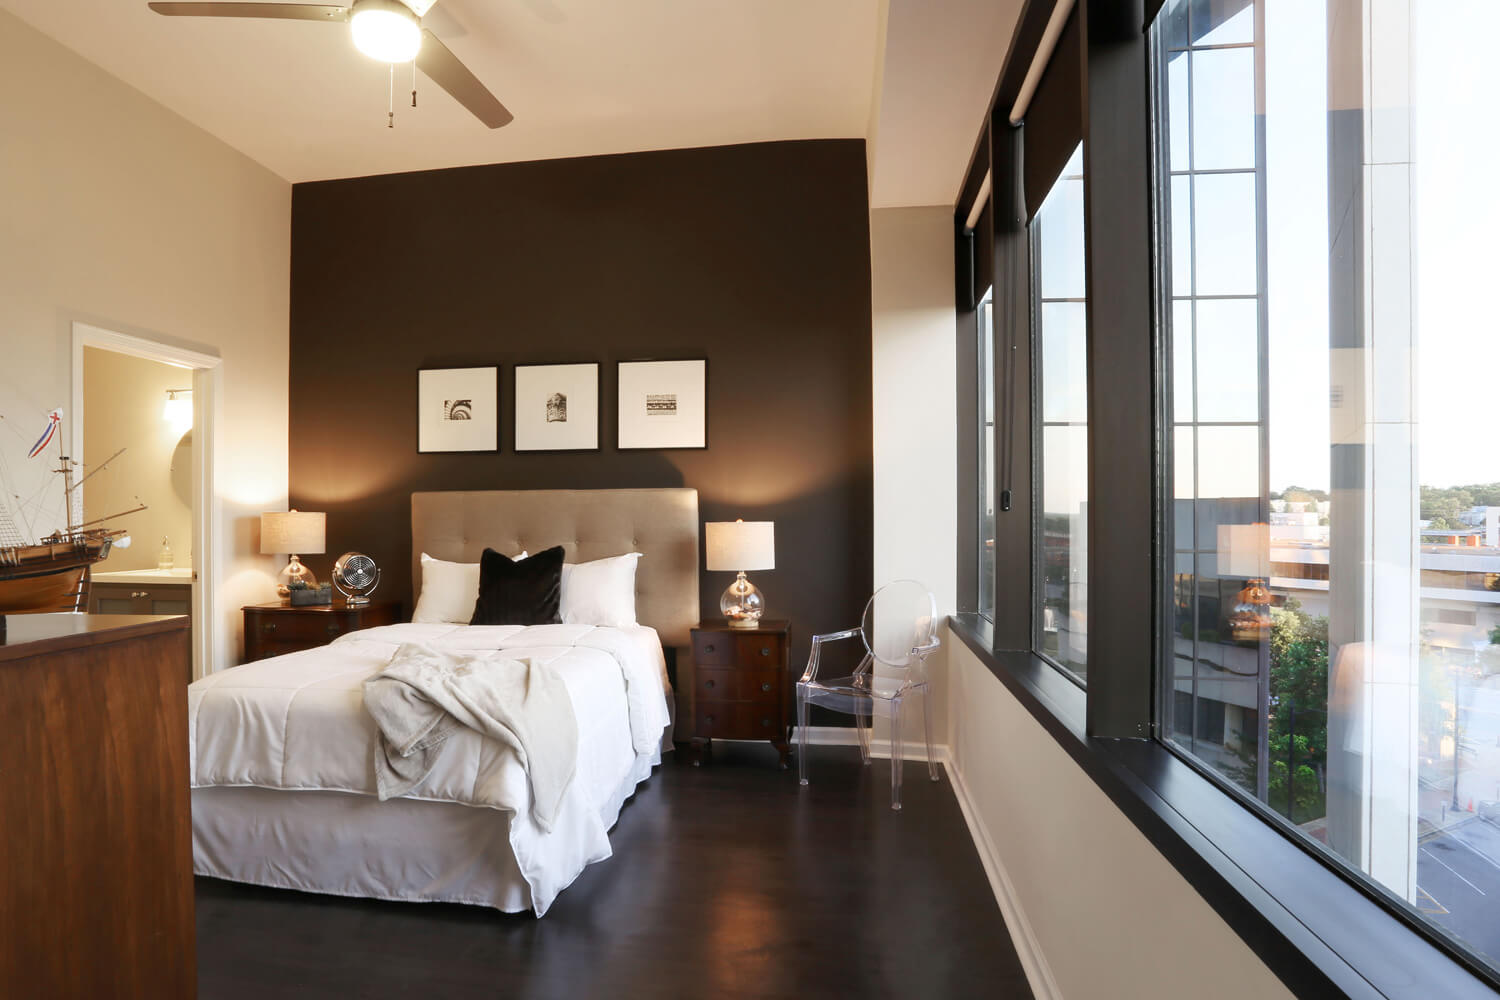 The 40 Four Building Designed by Foshee Architecture – Apartment Bedroom